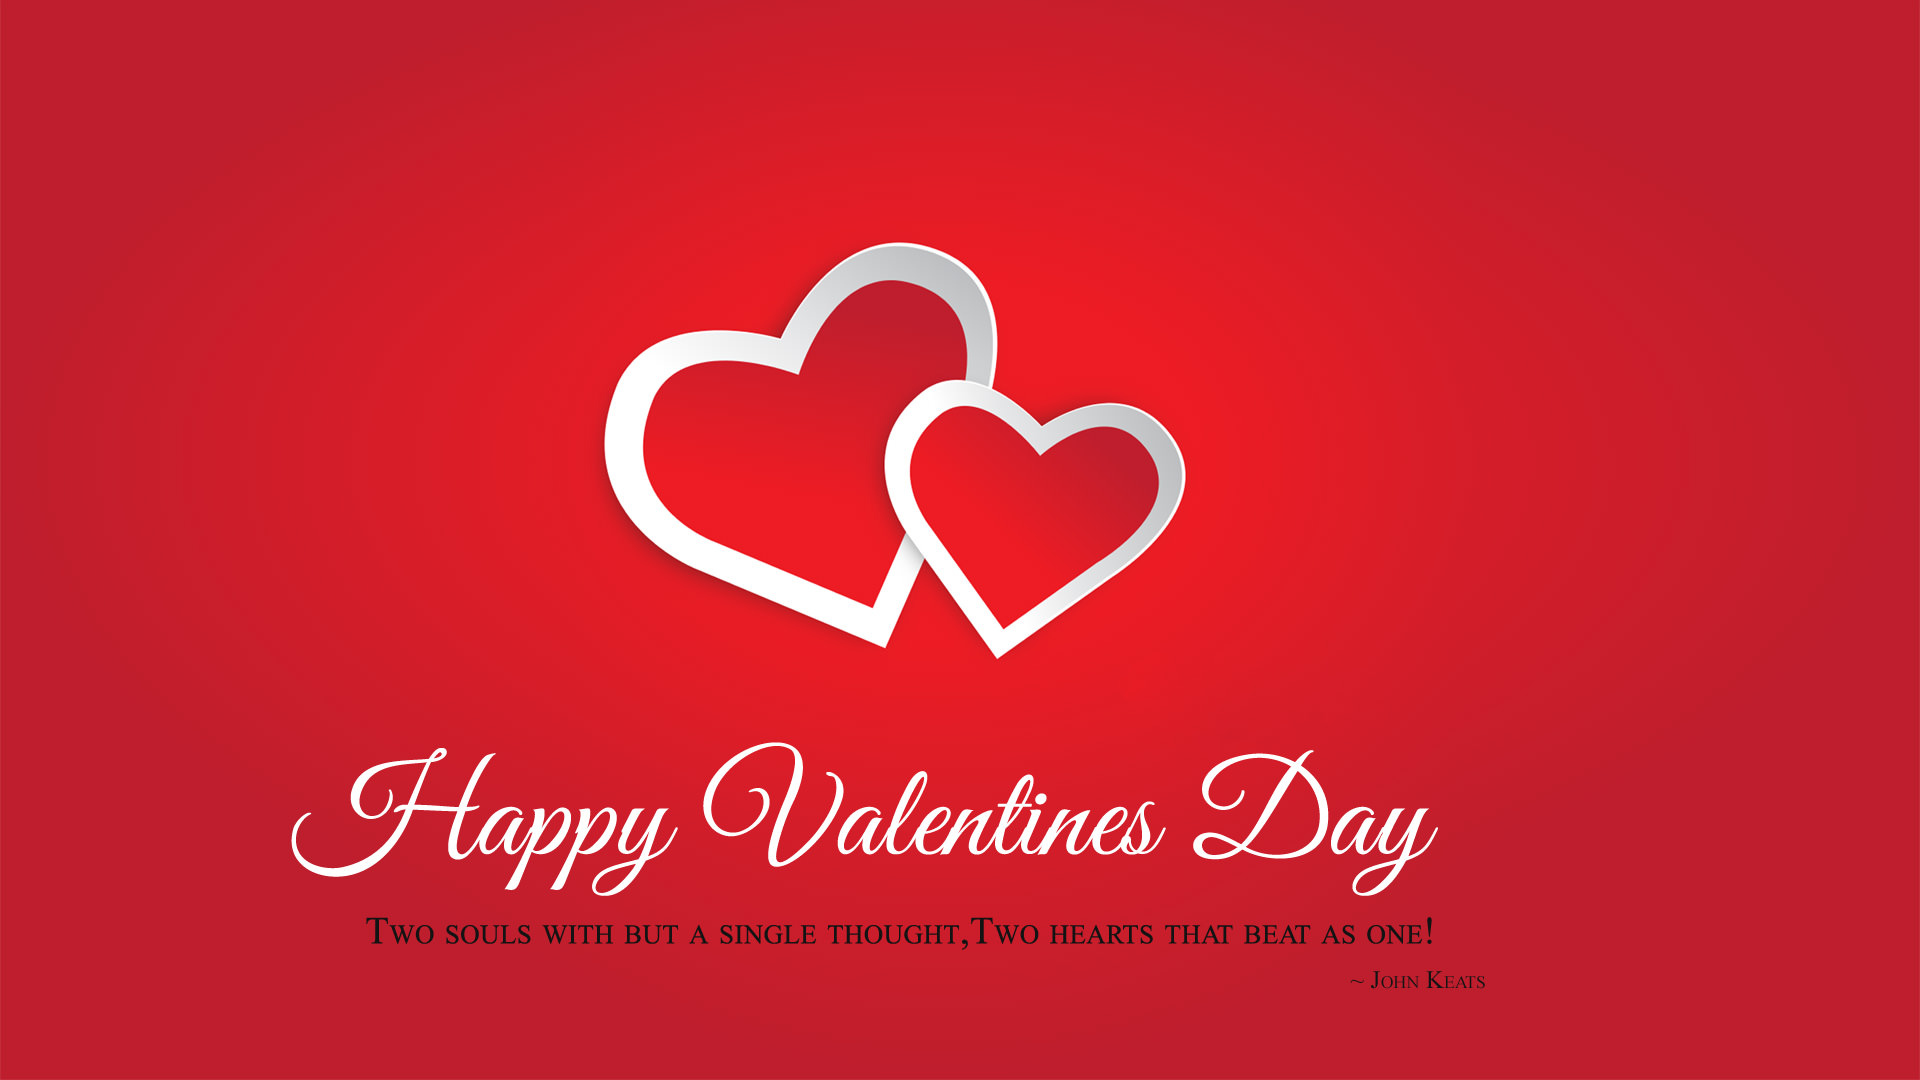 Feb Happy Valentines Day Wallpaper Full HD Special Love Image